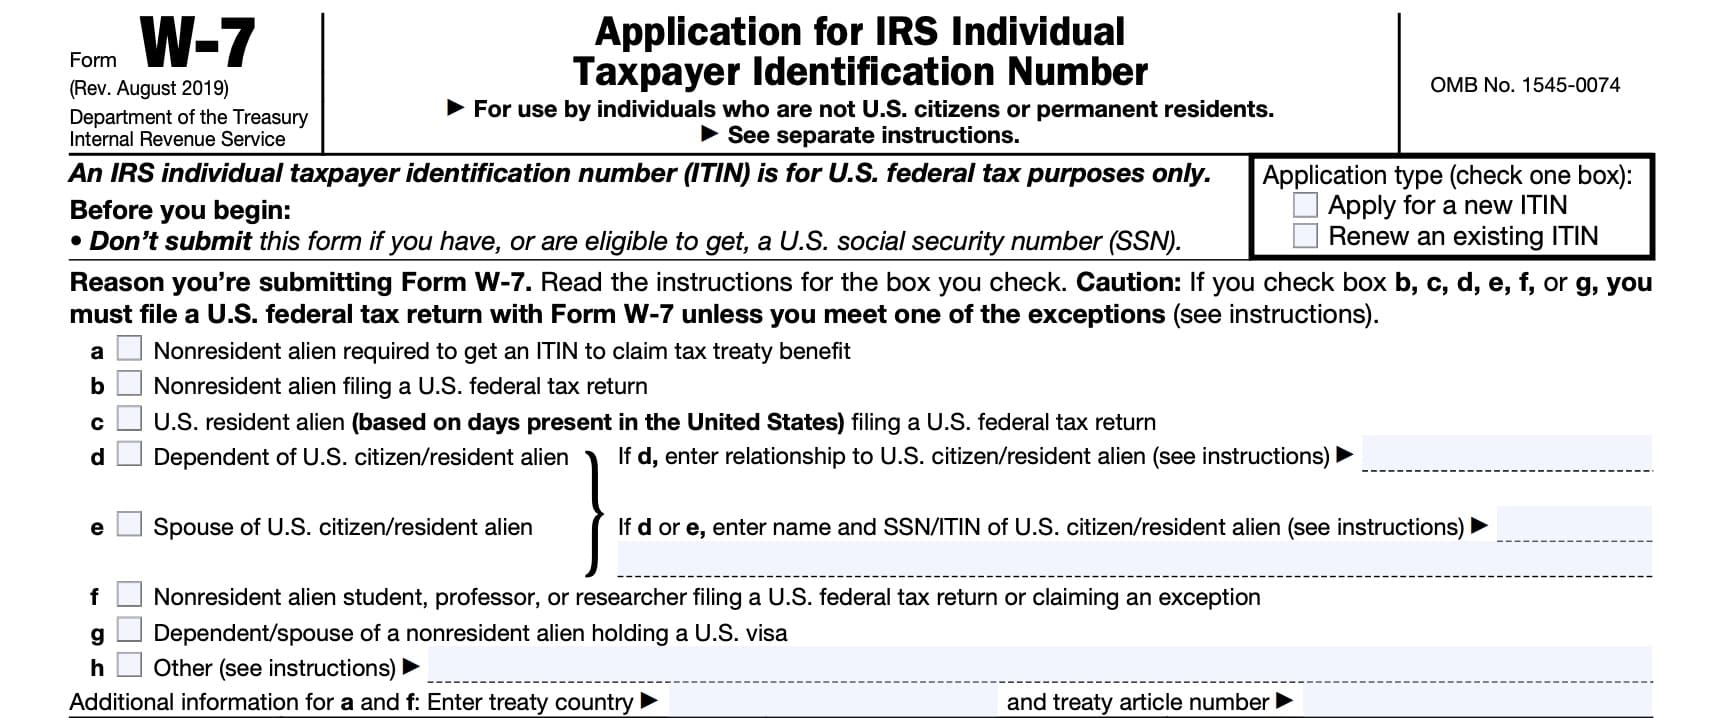 Form W-7, application for IRS individual taxpayer identification number, top